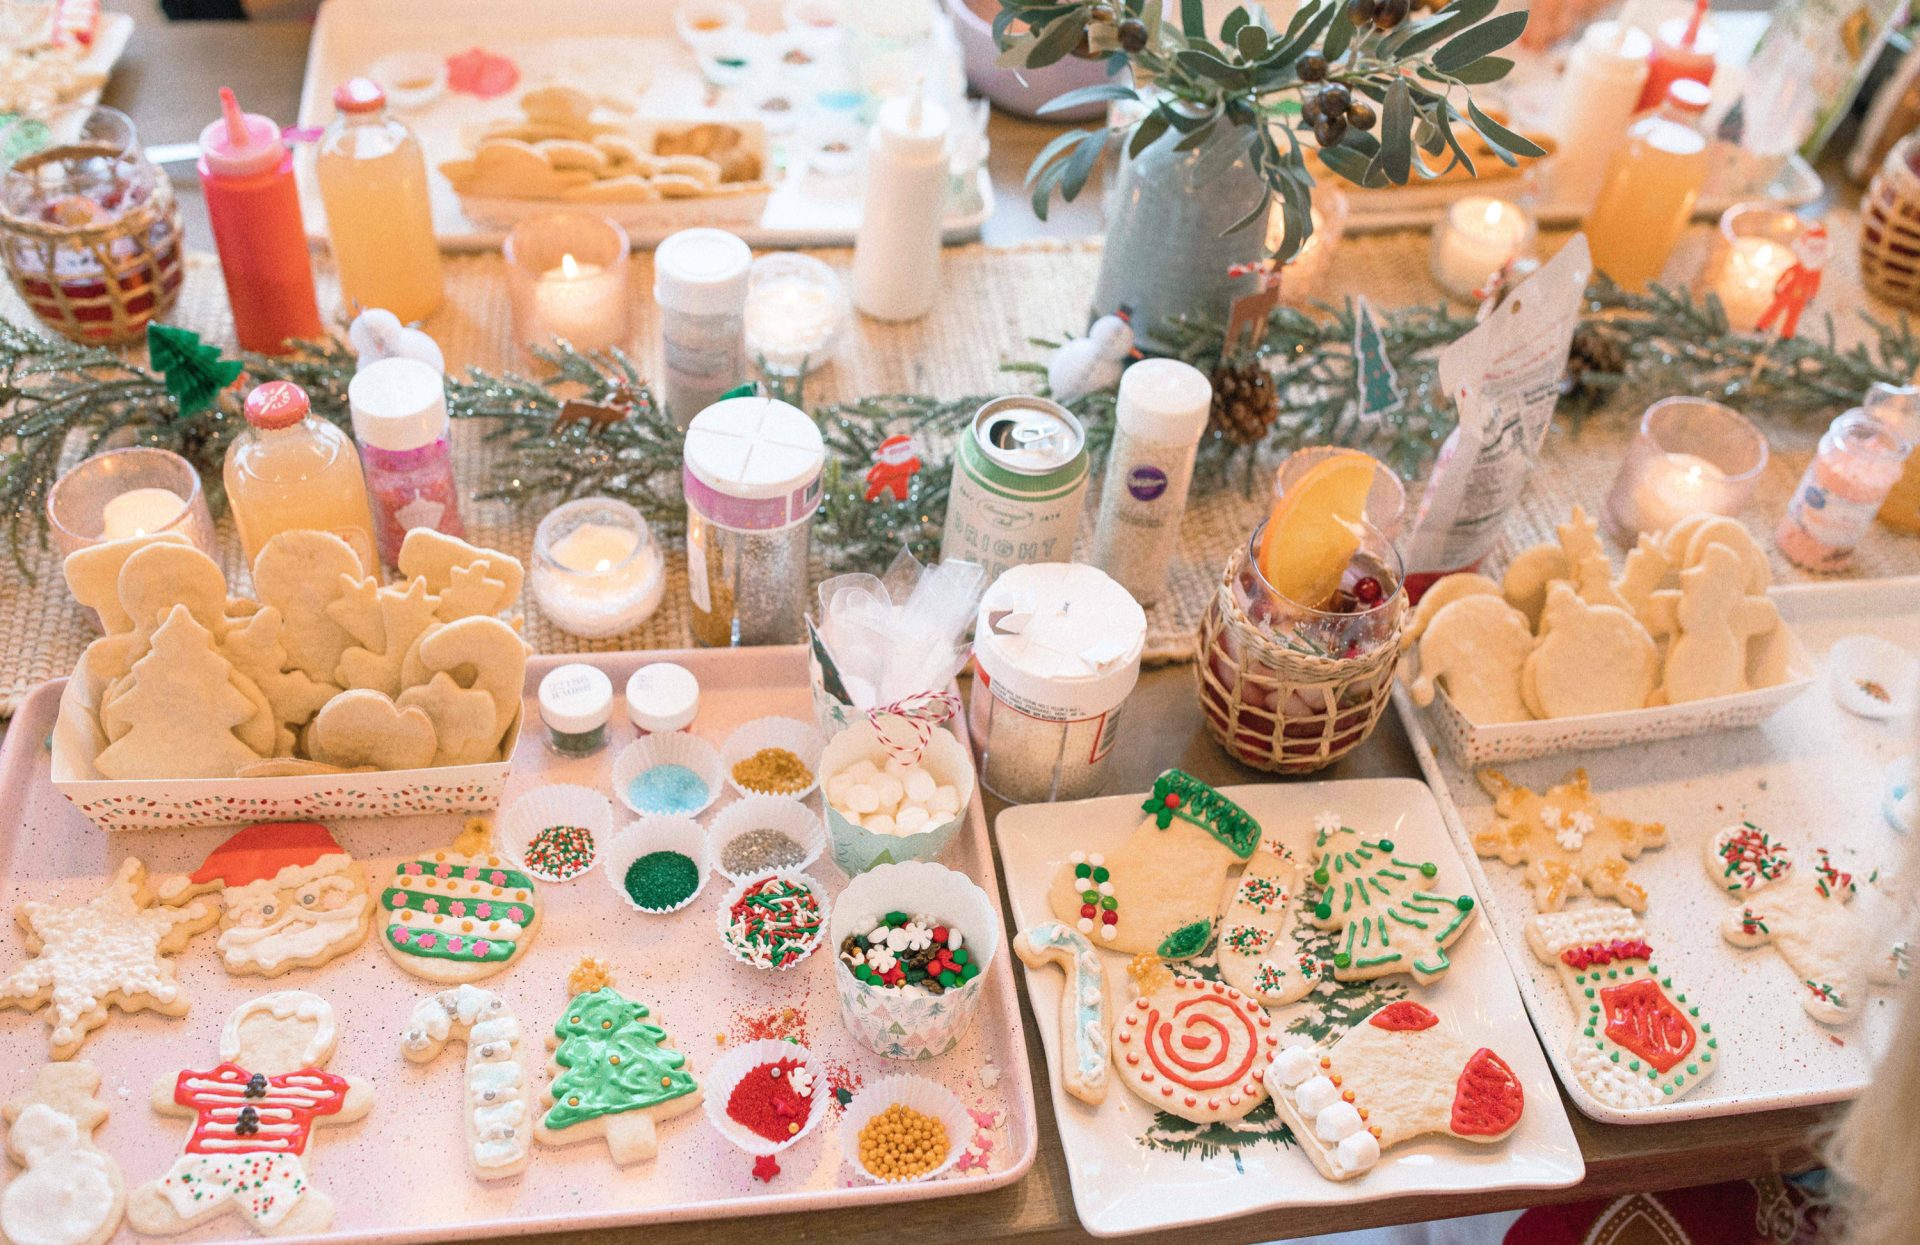 cookie decorating party, cookies, decorating, christmas cookies, fun christmas party, cookie decorating set up, holiday party with friends, christmas bucket list, holiday baking, friends party holidays, christmas brunch, frosted sugary cookies, sugar cookie roll out, fun party idea for girlfriends, holidays, cranberry cocktail, mocktail, coffee, fun Christmas, decorating station, fort mill South Carolina, blogger, lifestyle blogger, simply taralynn, decorating set up, what to do for christmas, christmas party